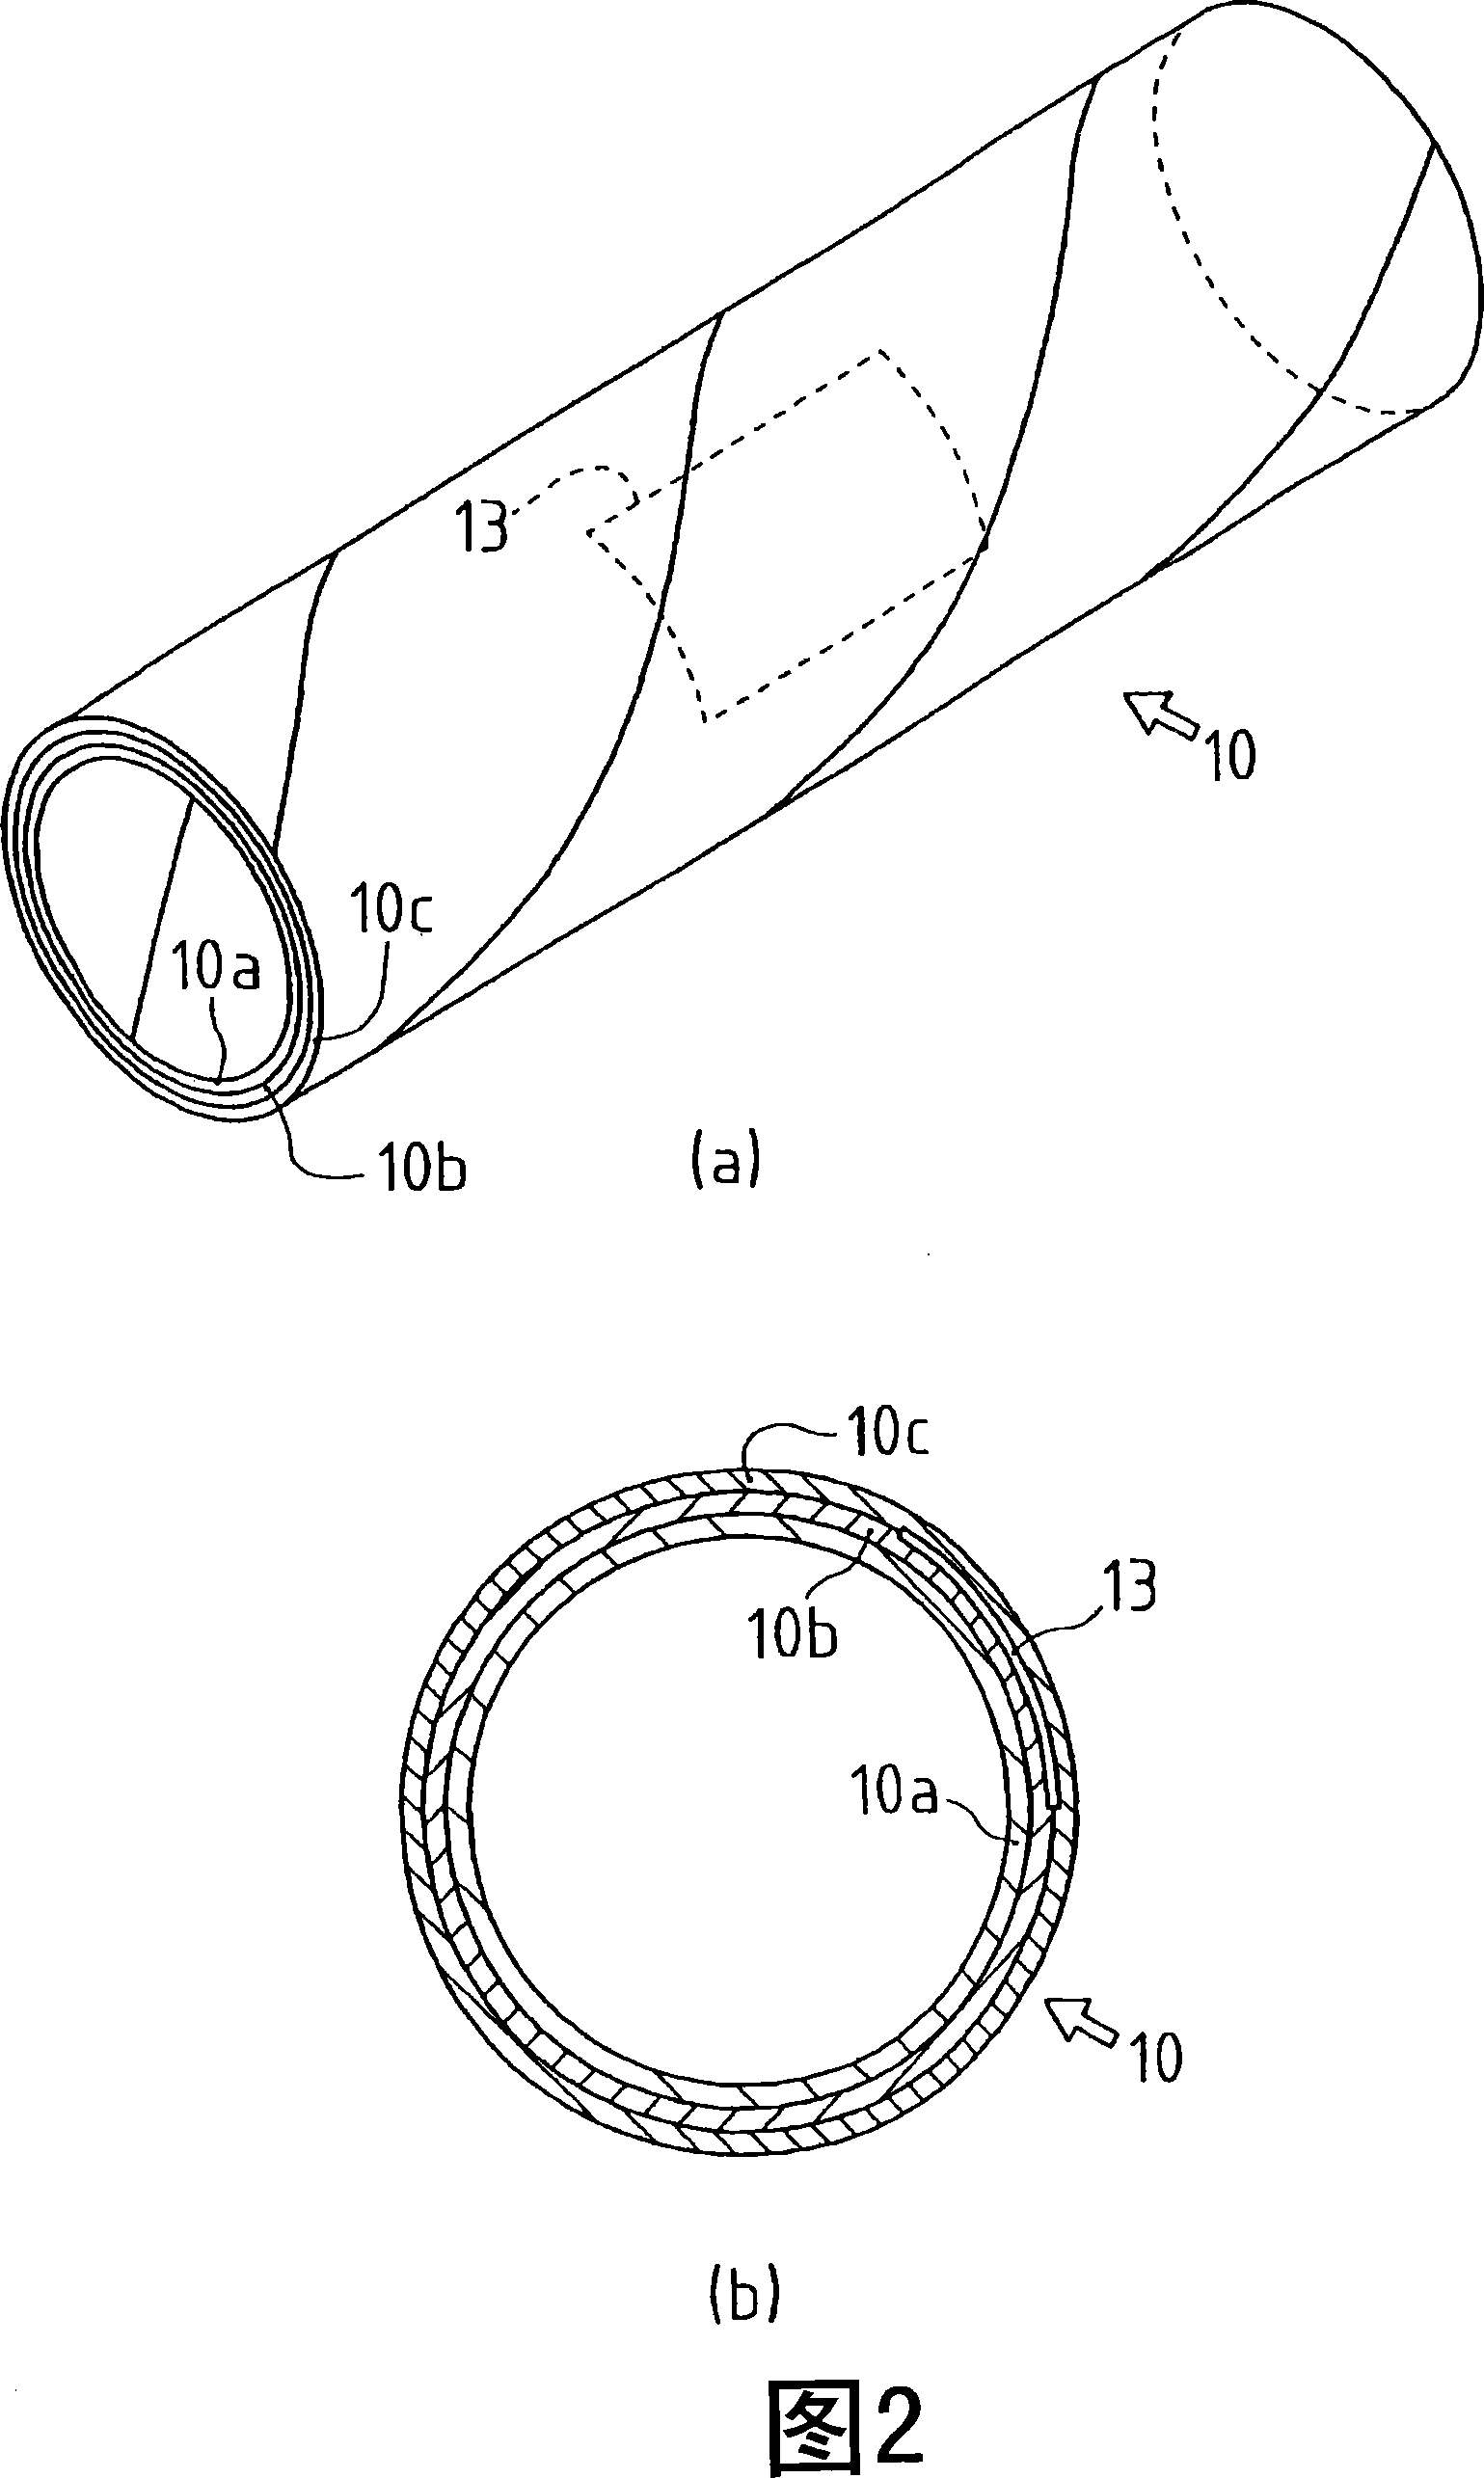 Take-up tube of wound yarn package and device for managing wound yarn package